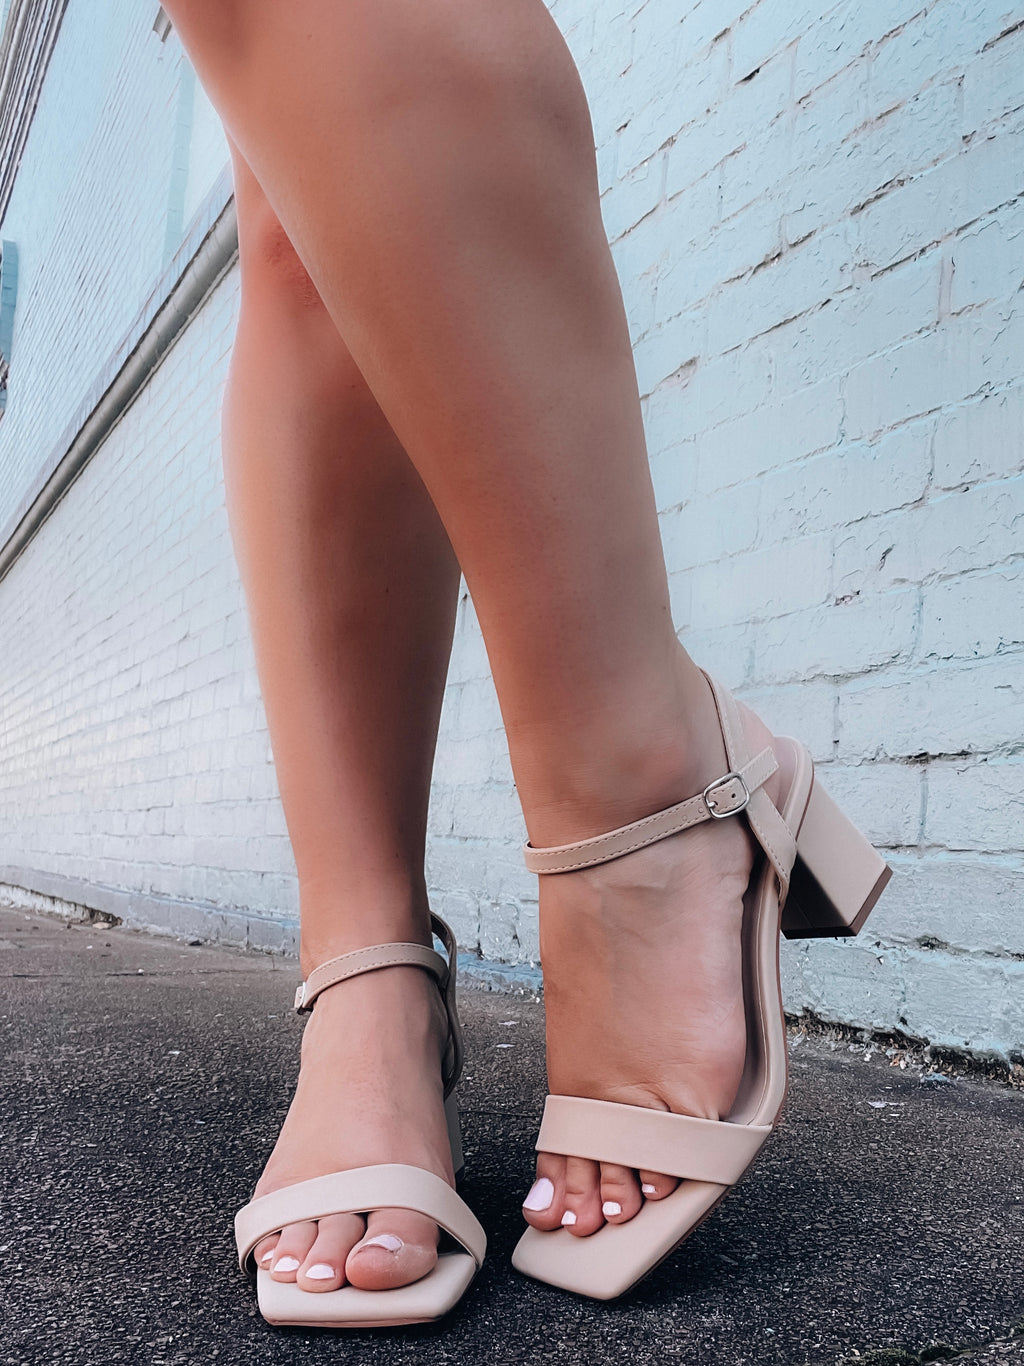 Heels feature a nude color, cross toe strap, low heel, ankle strap detail and runs true to size! 